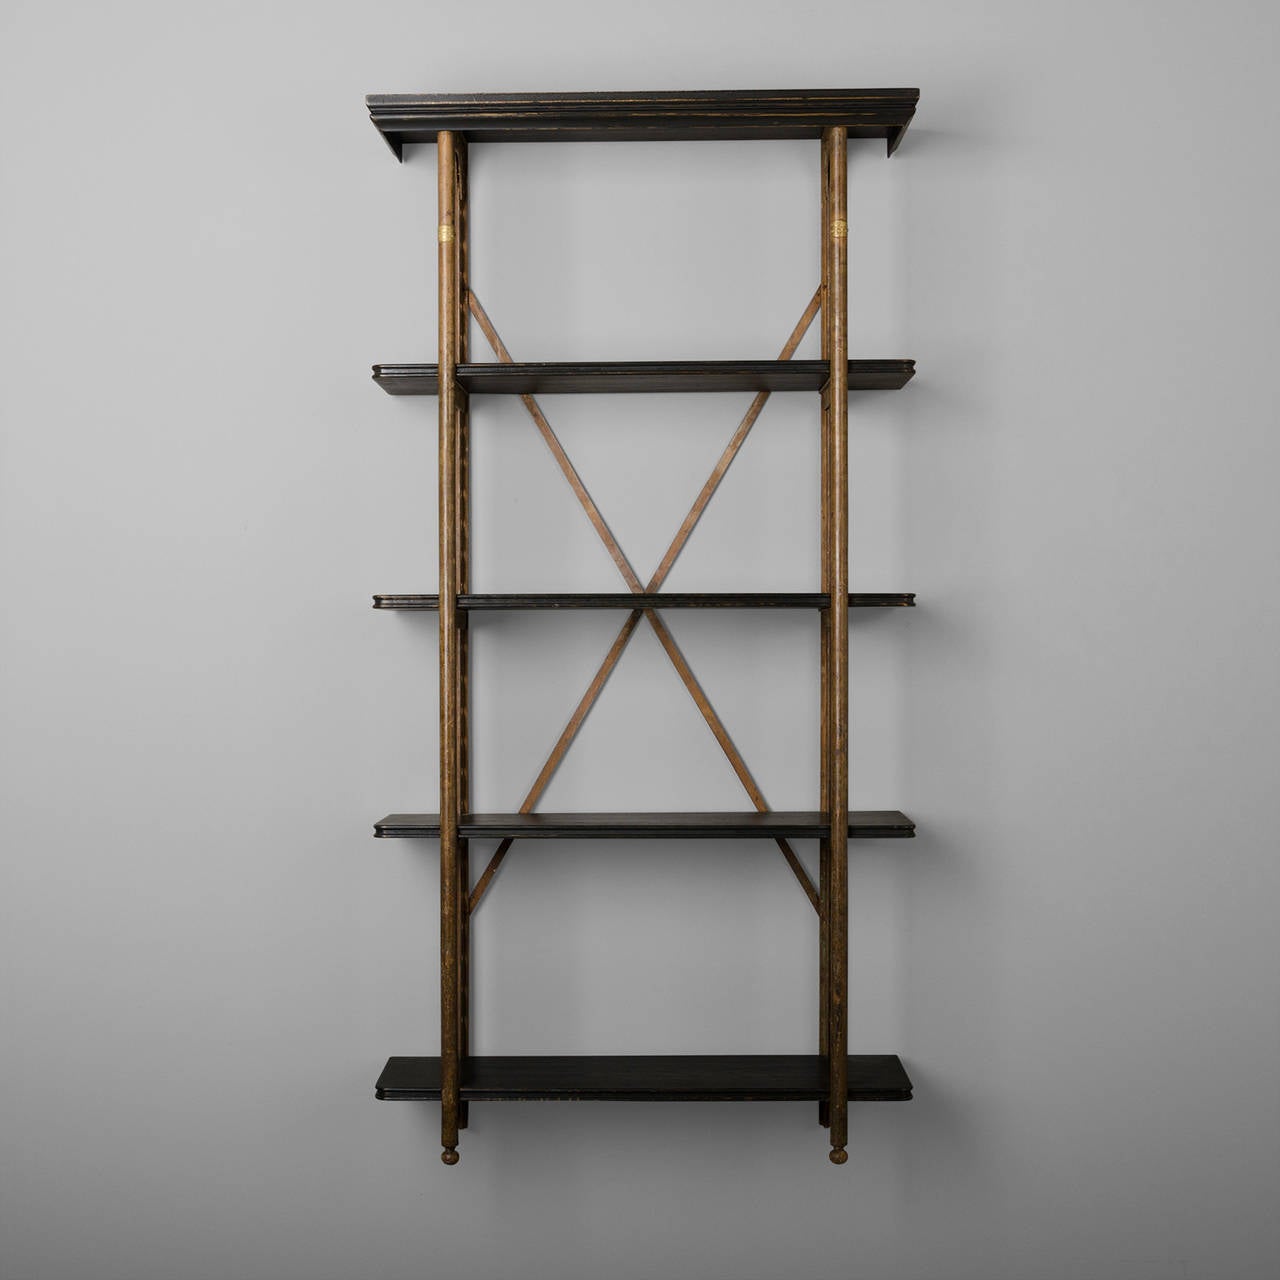 Steel structure steel with capitals and beaded rings, oak shelves. Brass plates 